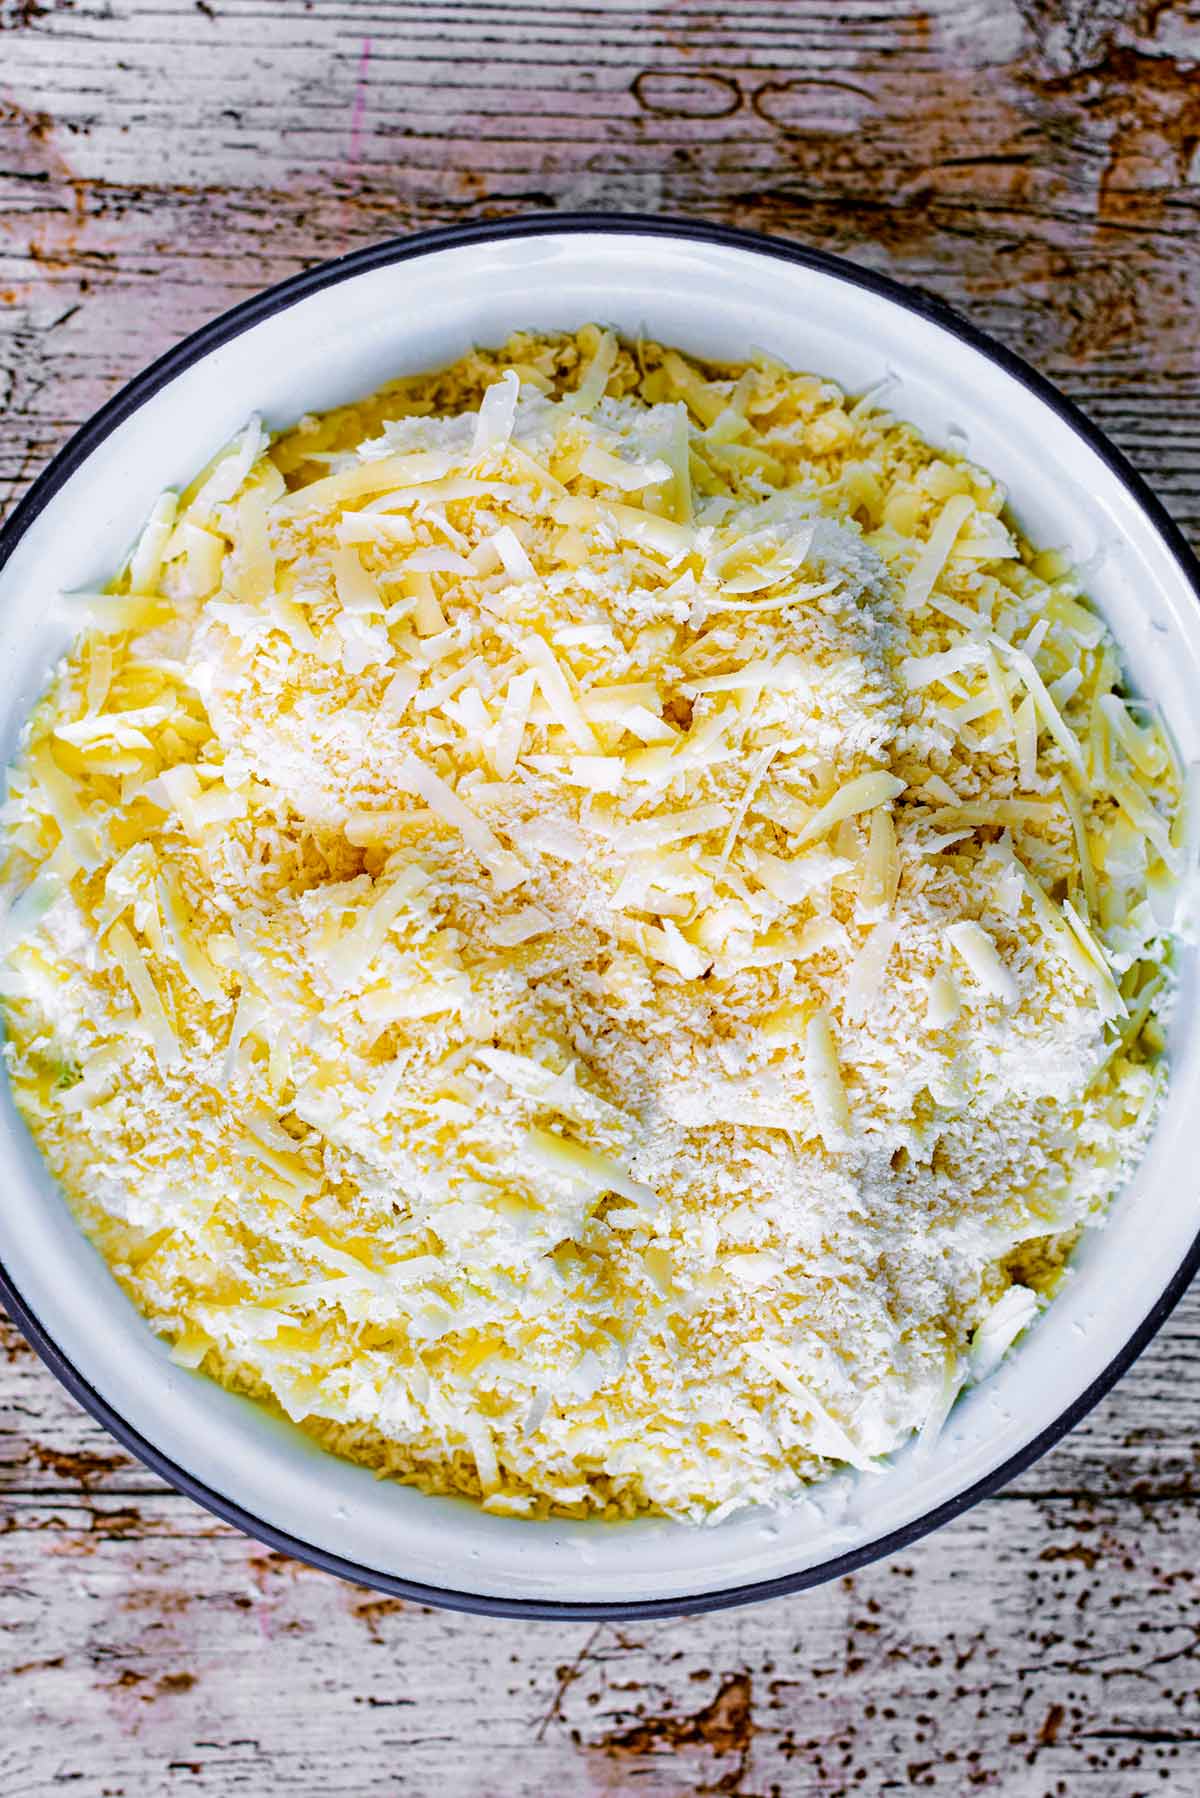 Uncooked cauliflower cheese, topped with grated cheese, in a baking dish.